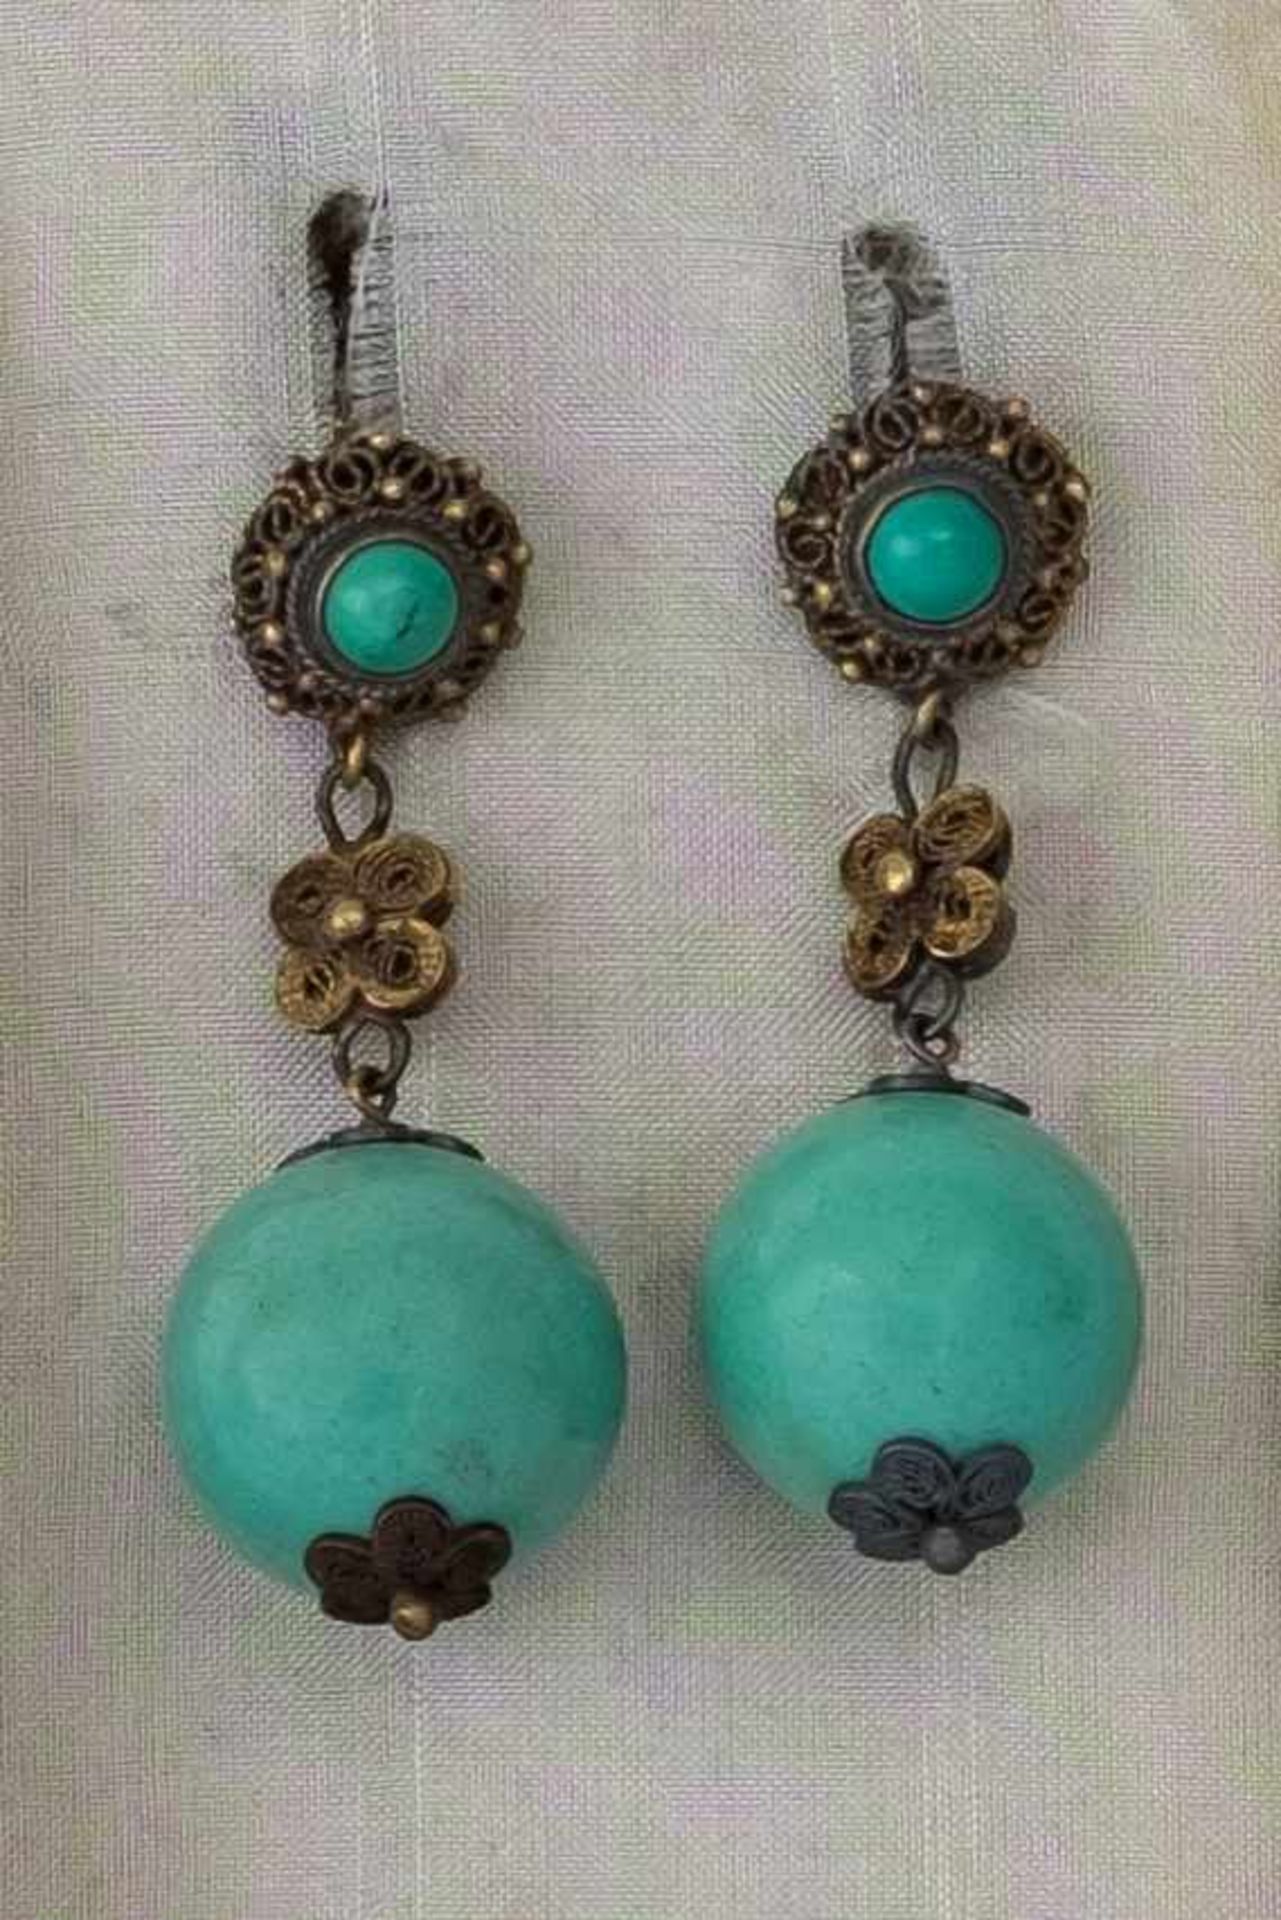 Pair of earrings - China, early 20th century Gilded silver filigree, each decorated with a turquoise